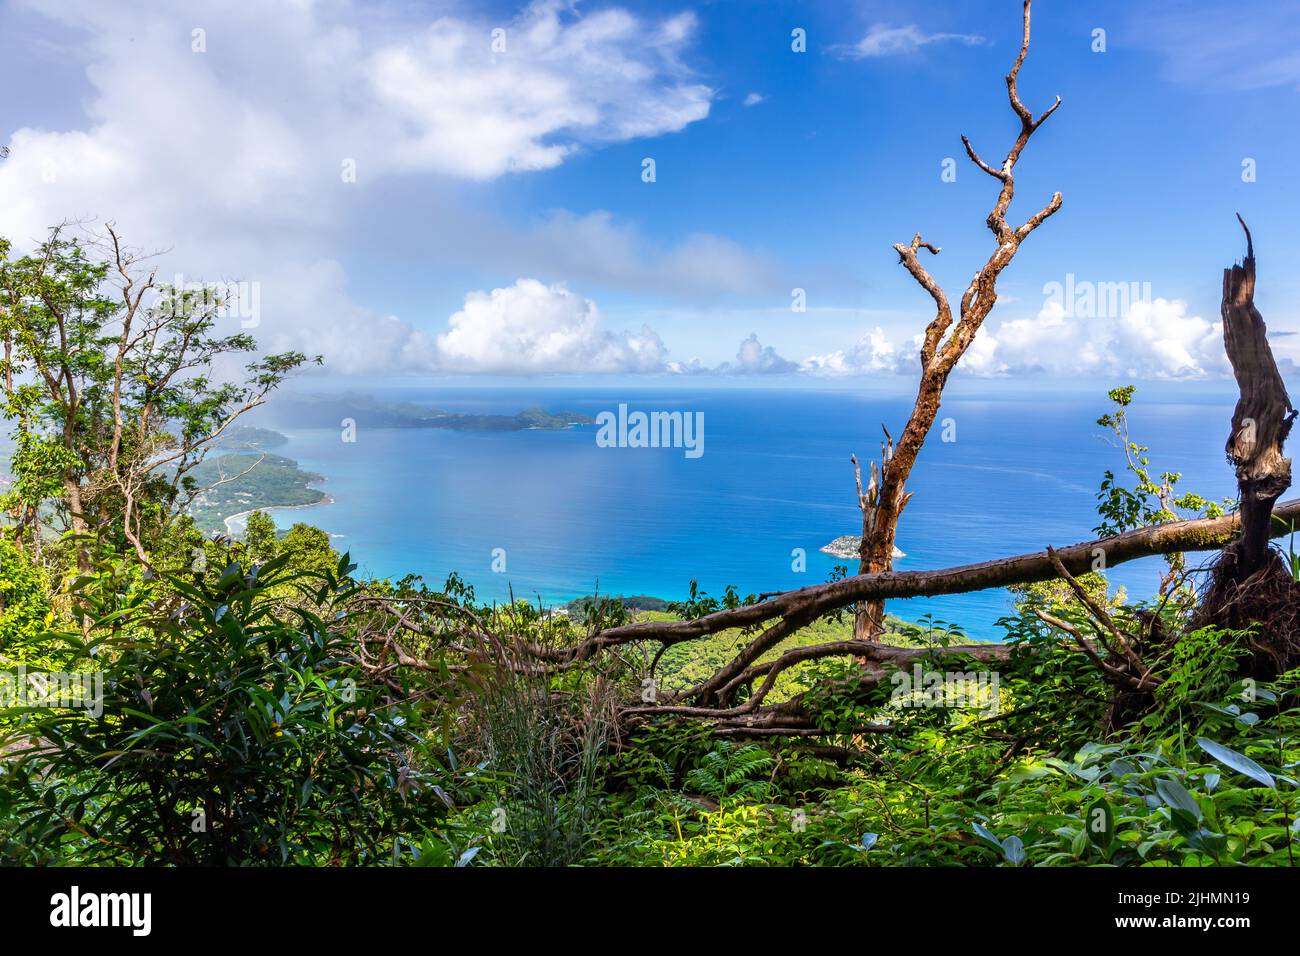 Landscape of Mahe Island, Seychelles seen from Morne Blanc View Point with lush tropical vegetation and crystal blue ocean. Stock Photo